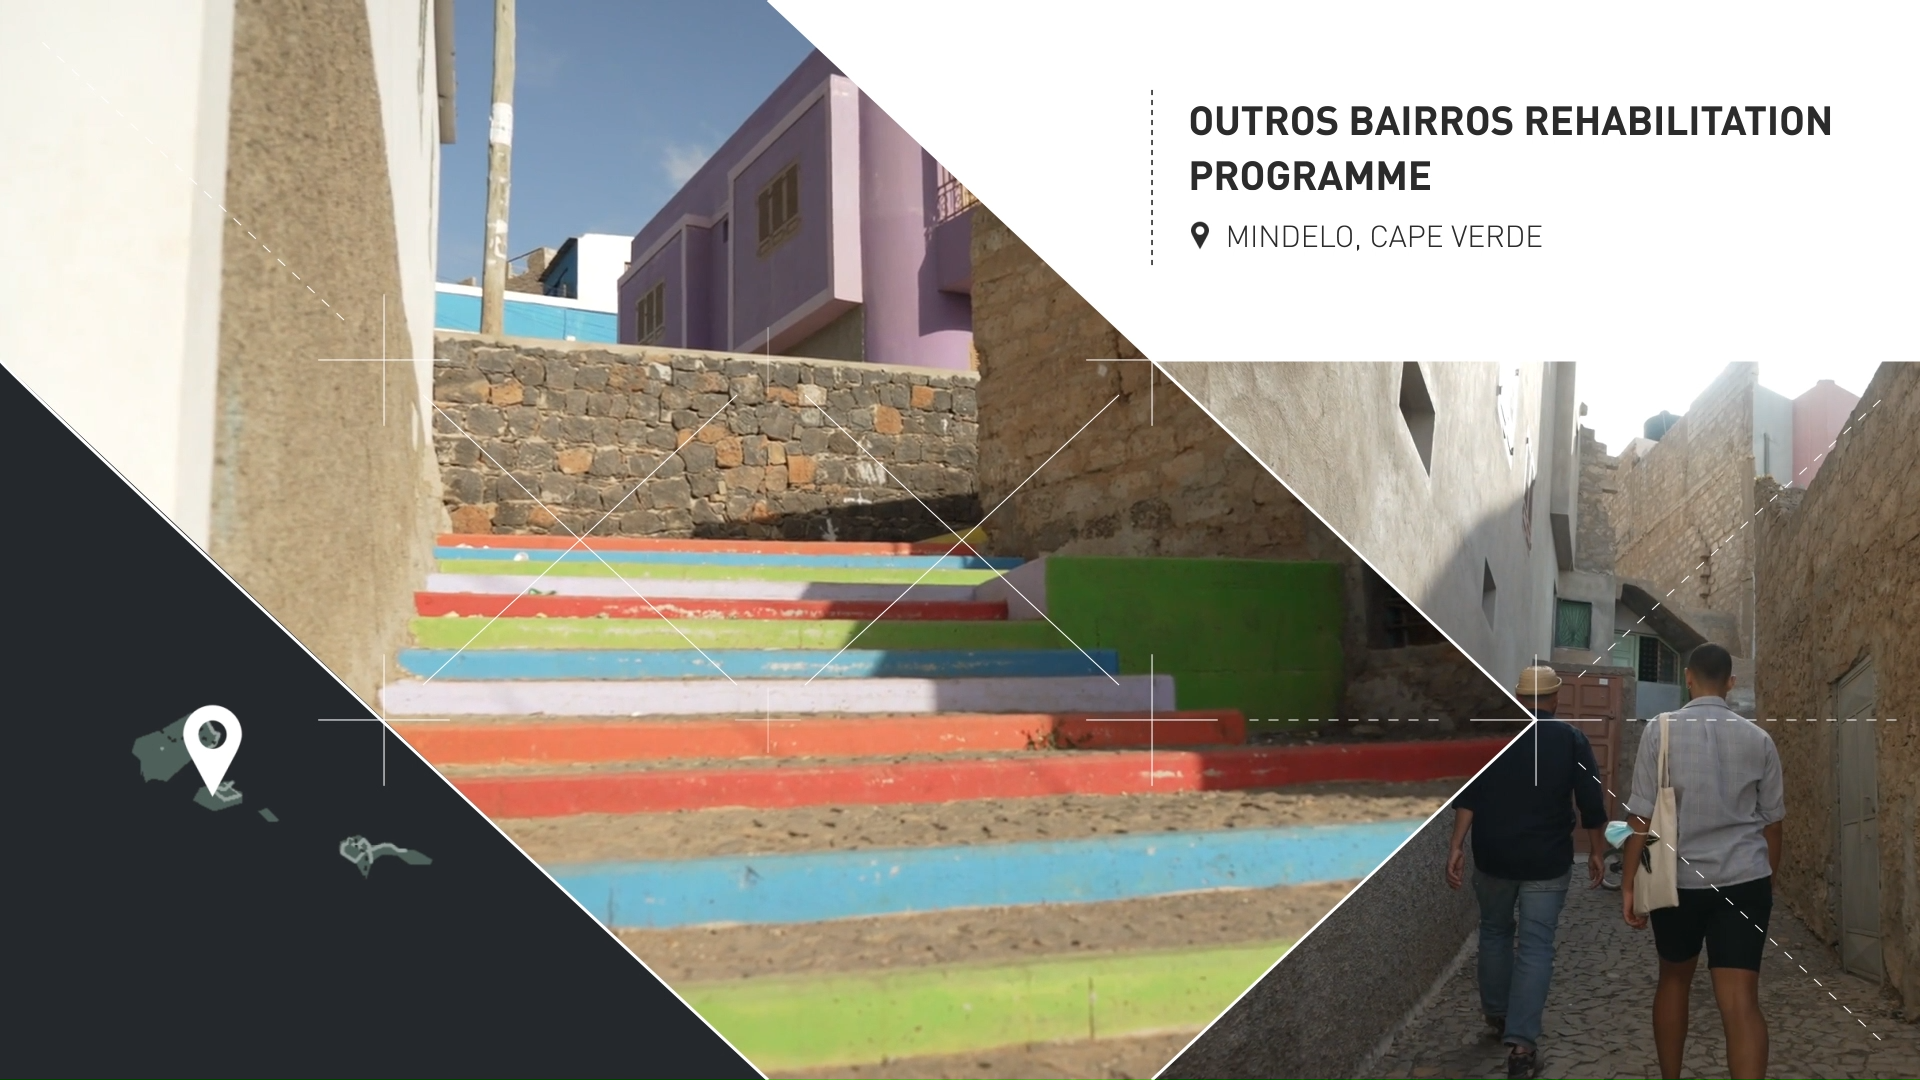 <p>Outros Bairros Rehabilitation Programme,&nbsp;Mindelo, Cape Verde, by OUTROS BAIRROS / Nuno Flores: An urban rehabilitation and redesign of a public space allowed residents to execute works in their own neighbourhoods and enhance their sense of belonging.</p>